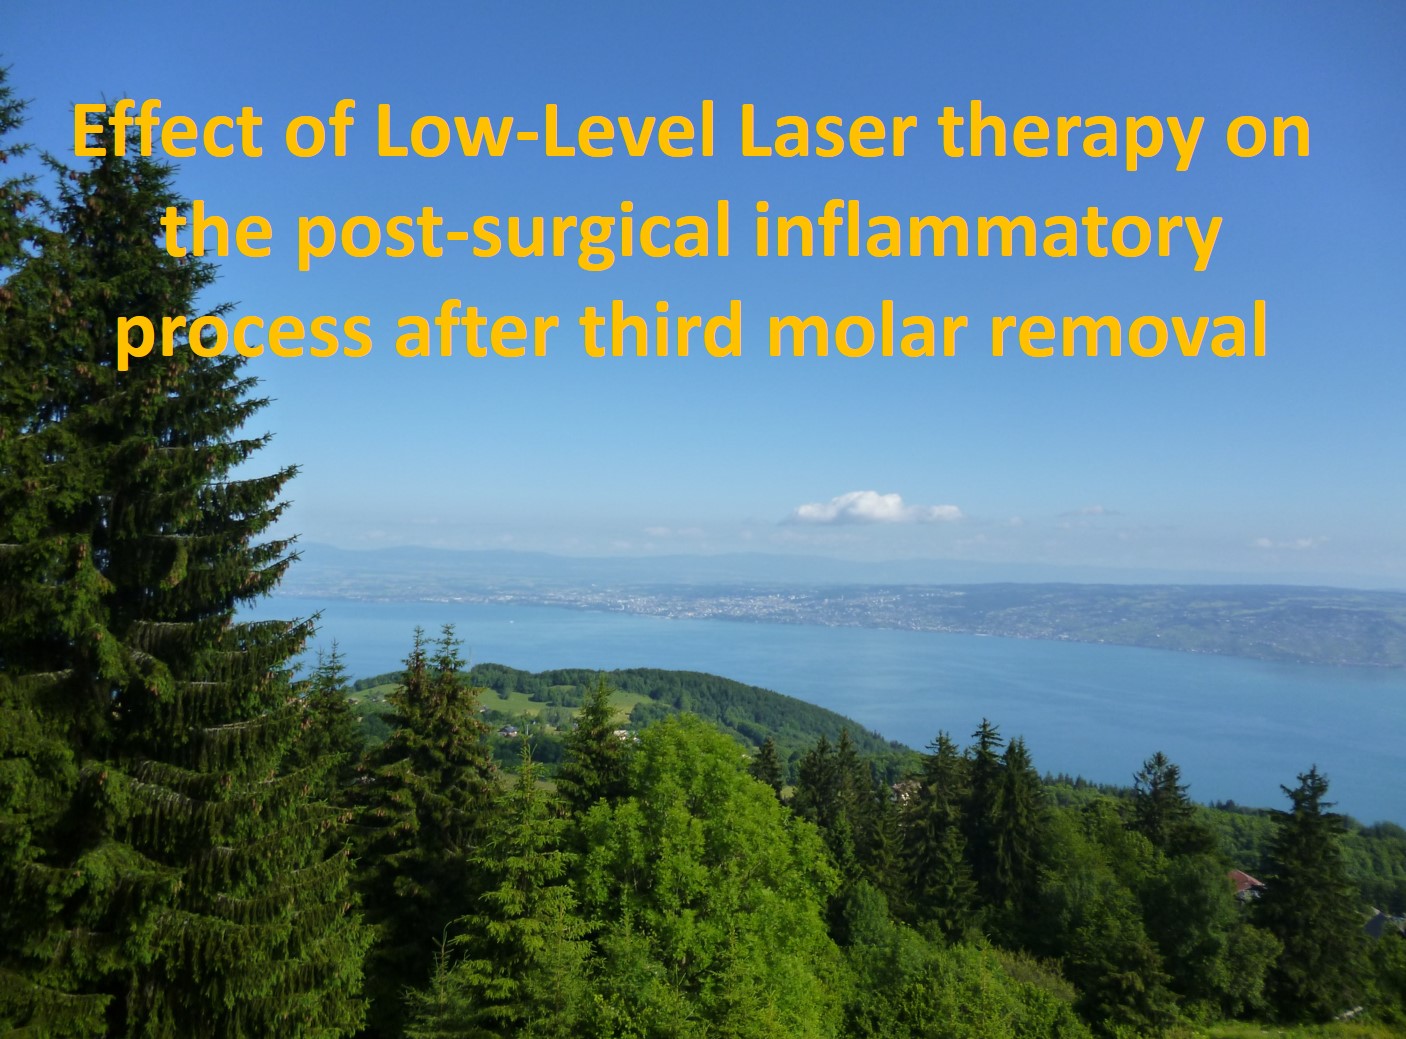 Quelques Articles " UP TO DATE" 1 - Effect of low-level laser therapy on the post-surgical inflammatory process after third molar removal